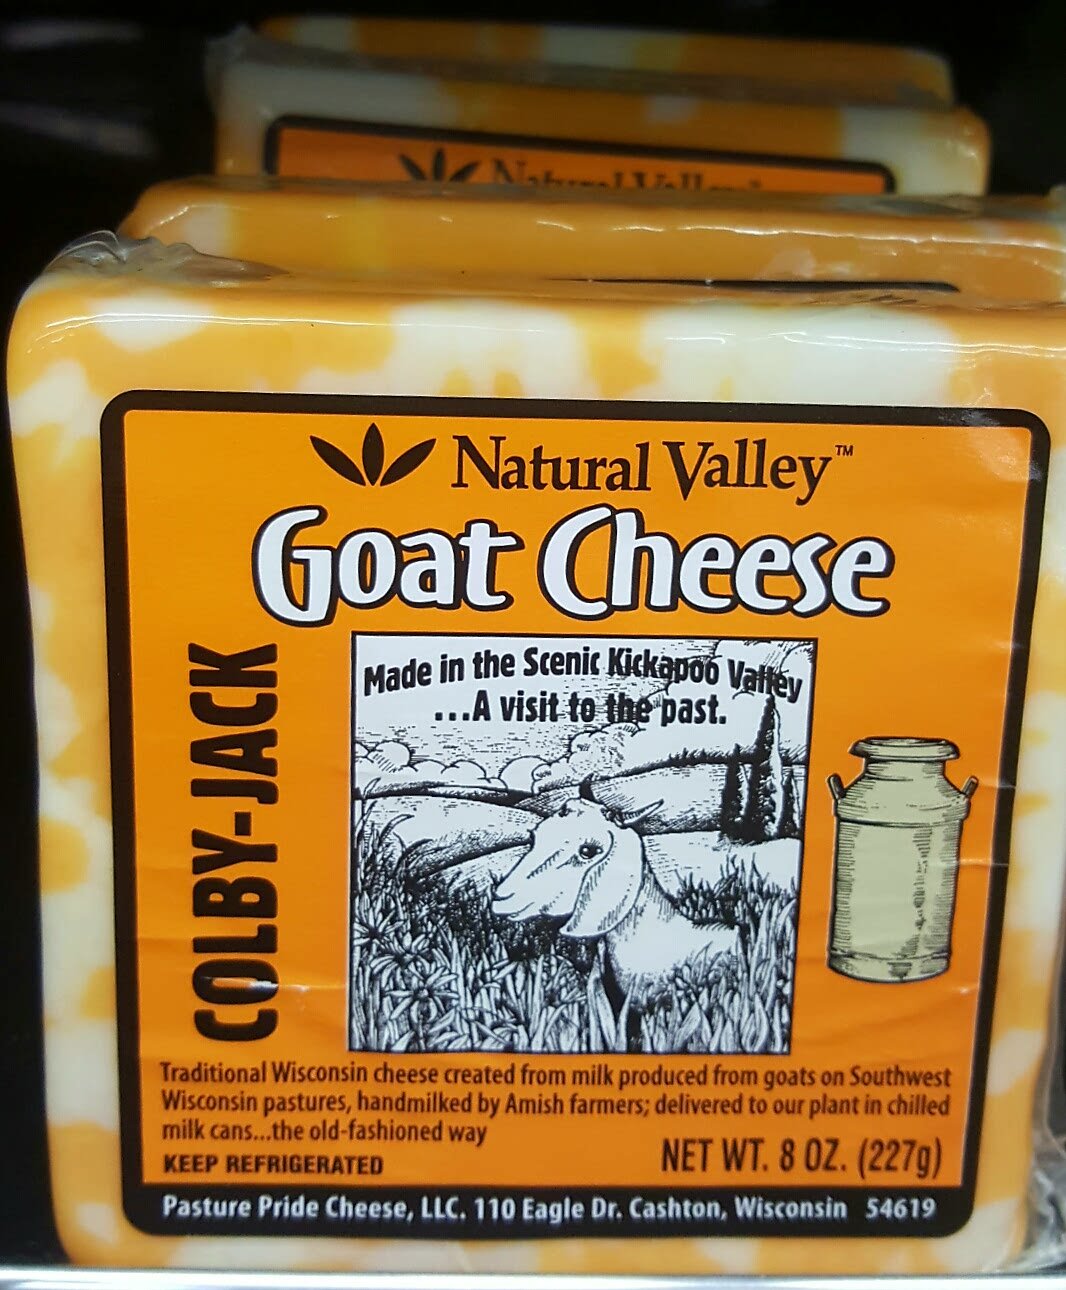 Oct 17 Natural Valley goat cheese.jpg